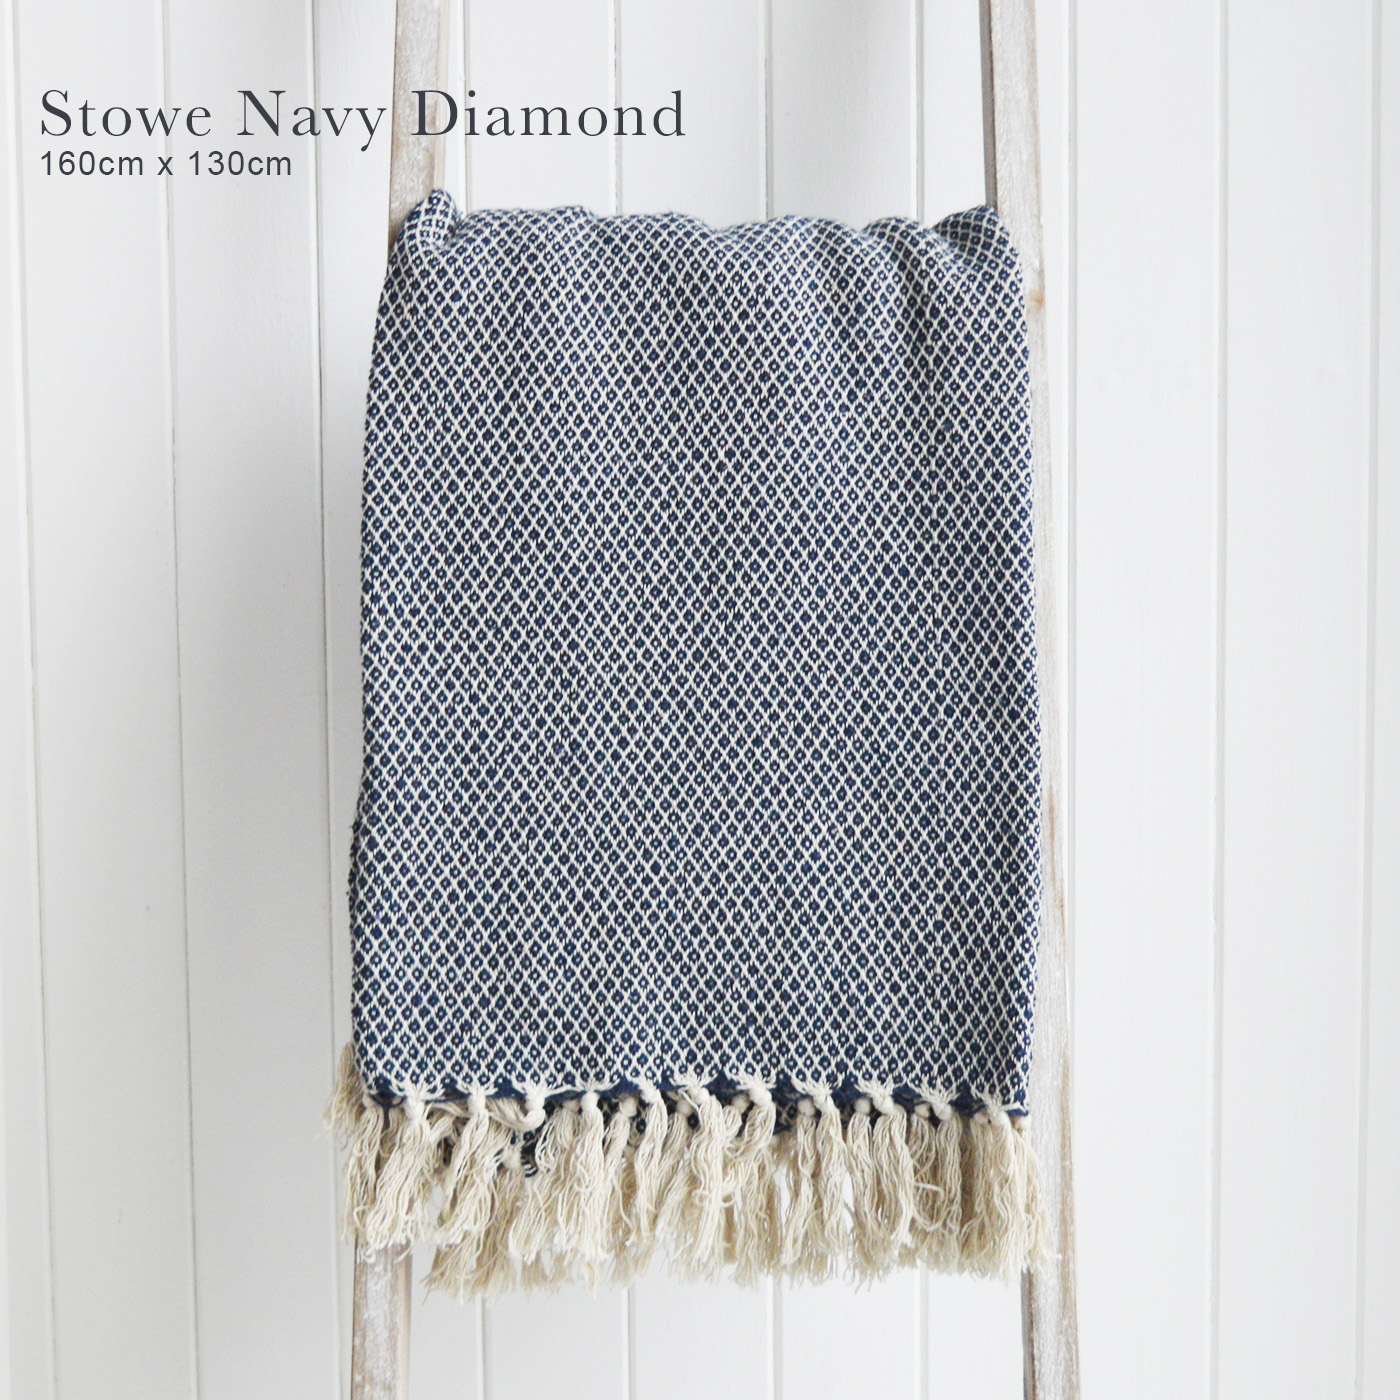 Stowe throws in blues, greys and natural coloures  for interiors in New England styles modern farmhouse, country, coastal and city homes from The White Lighthouse. Furniture and home interiors UK - Navy Blue Diamond Throw